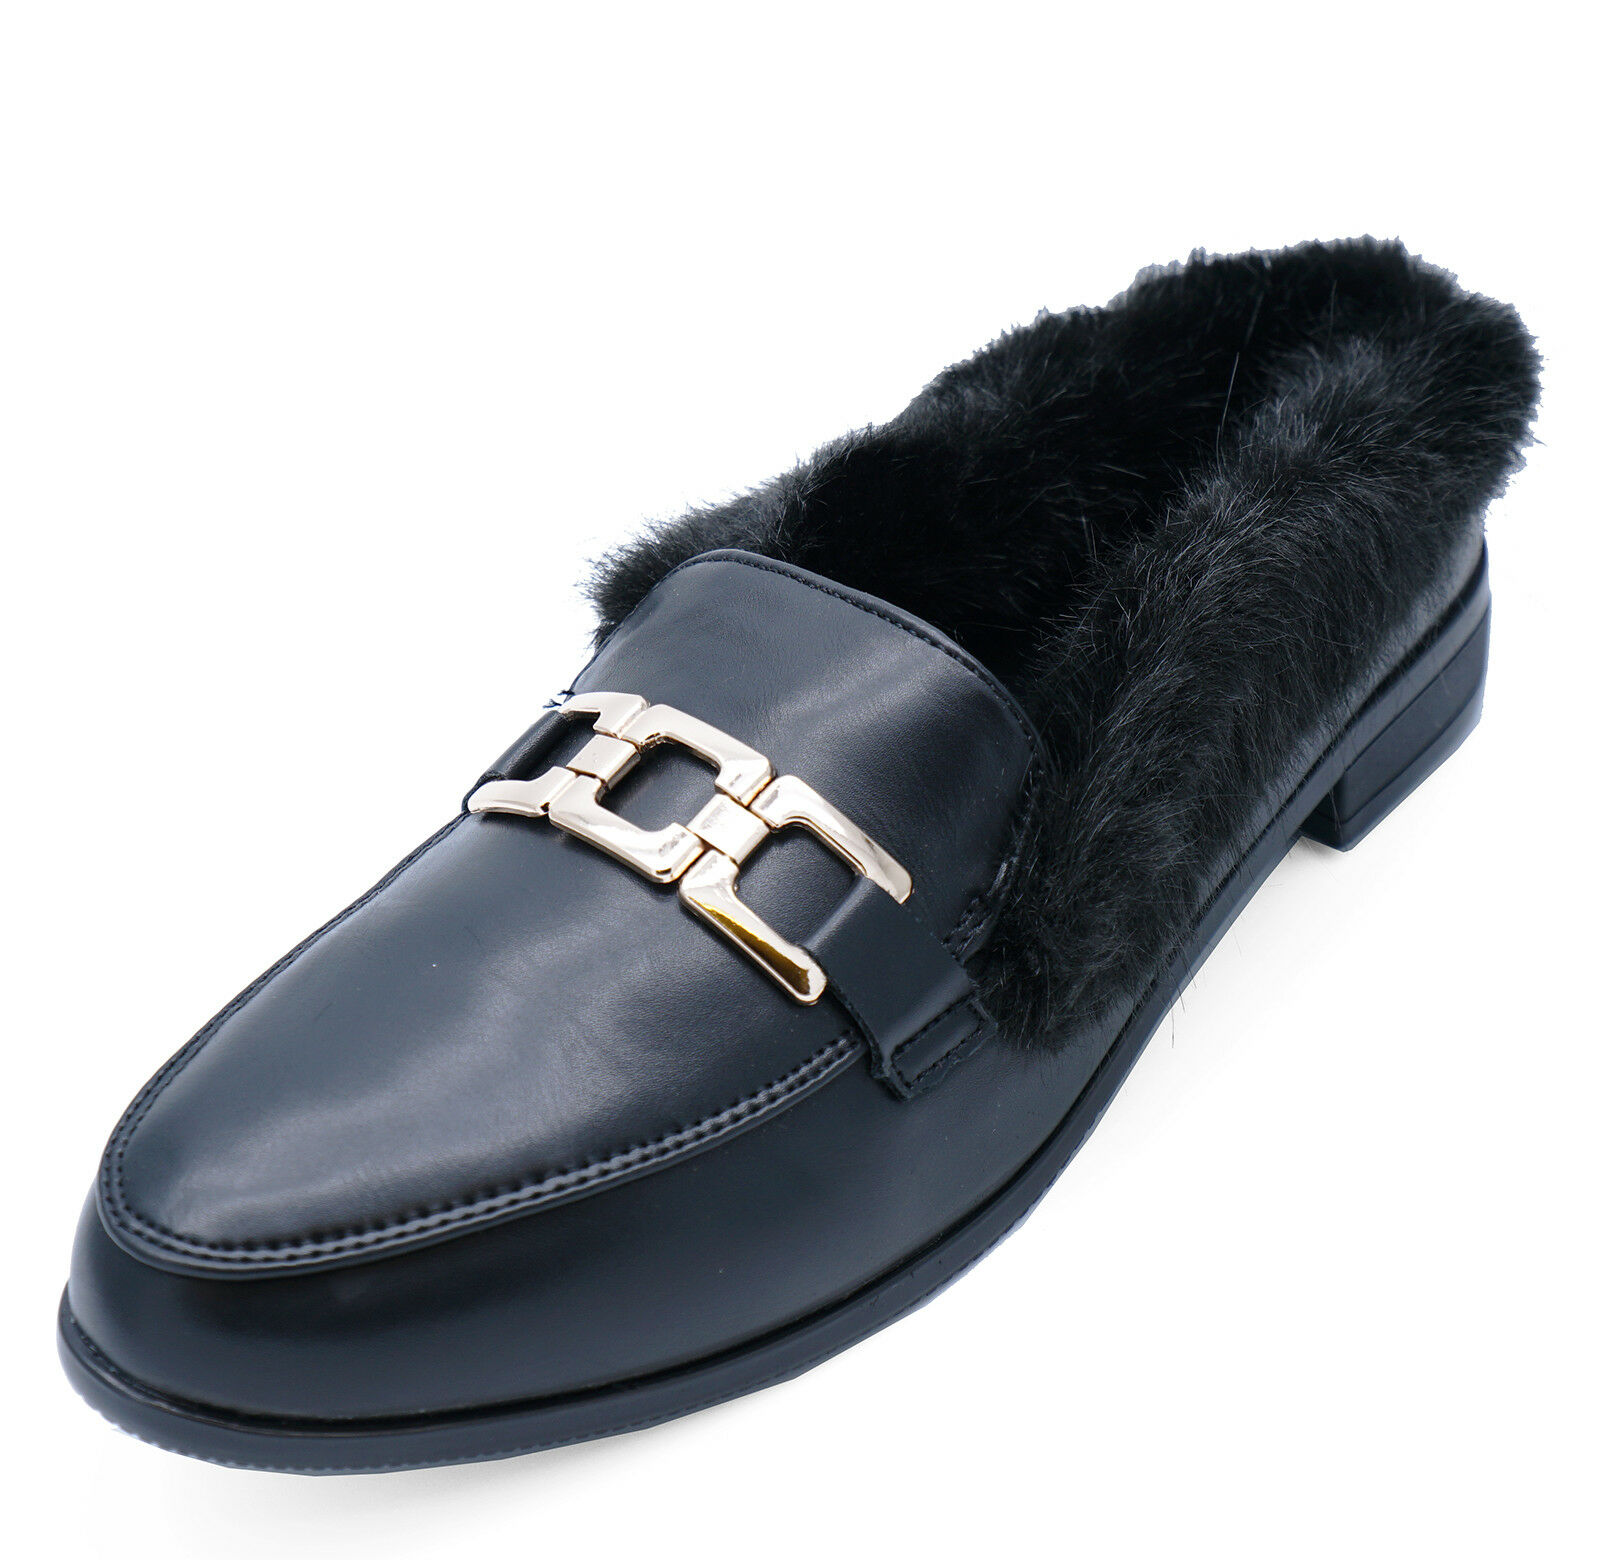 SMART MULES LOAFERS SLIDERS SHOES SIZES 